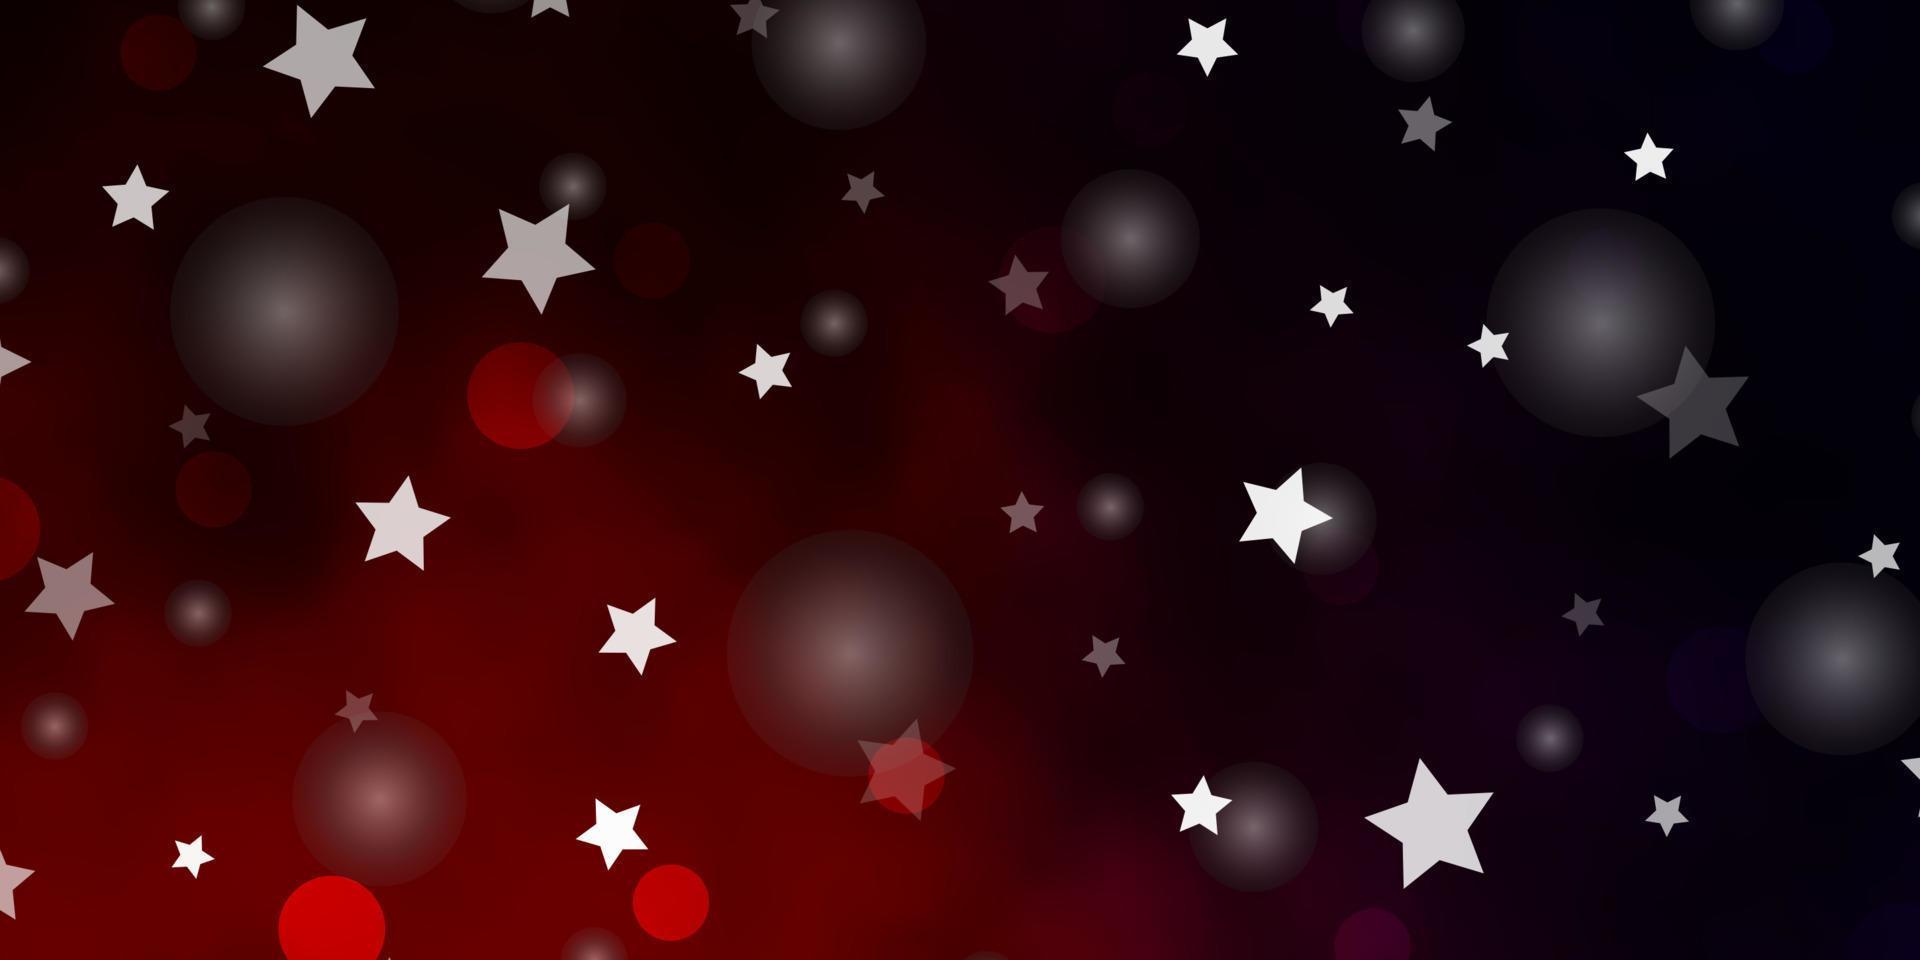 Dark Blue, Red vector background with circles, stars.